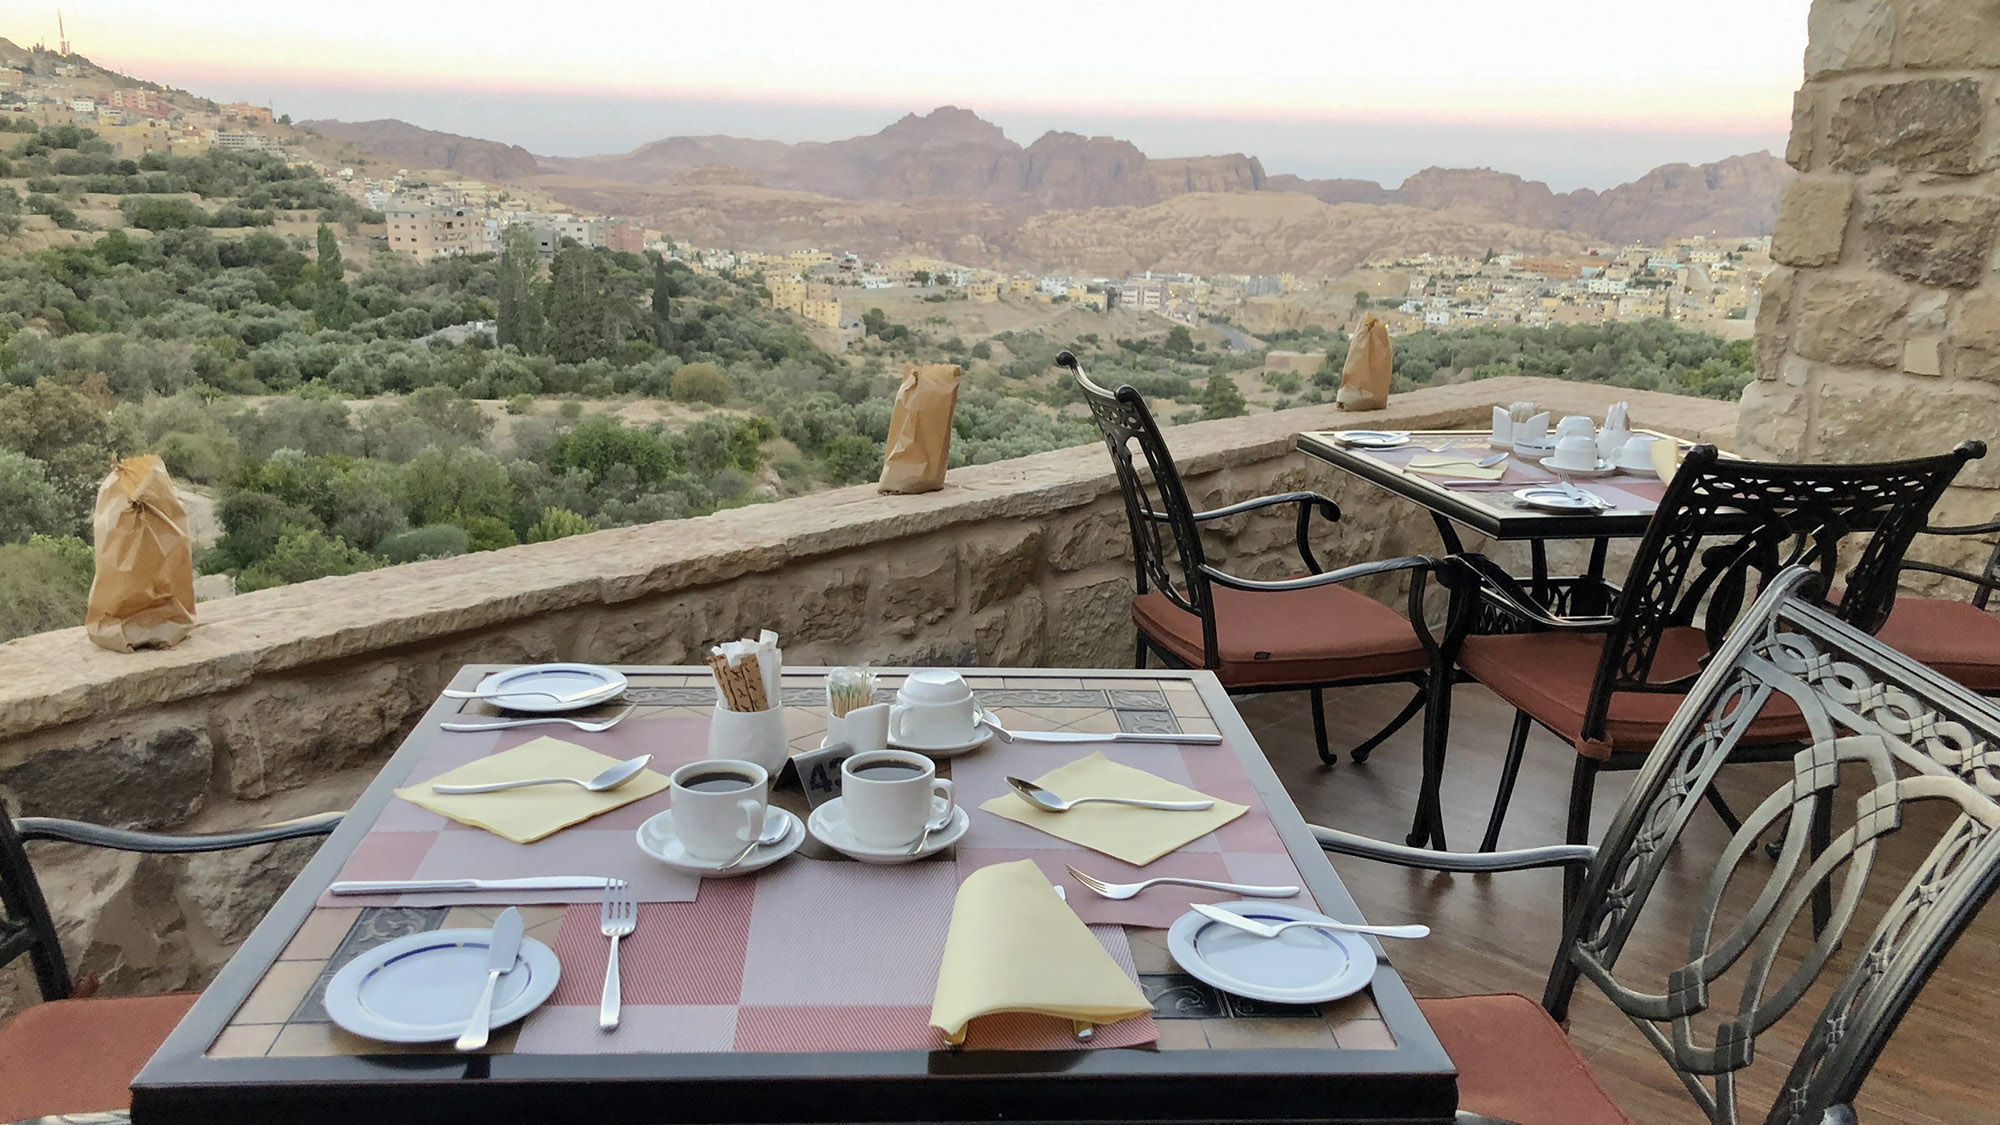 The view from the Old Village Hotel and Resort in Petra.